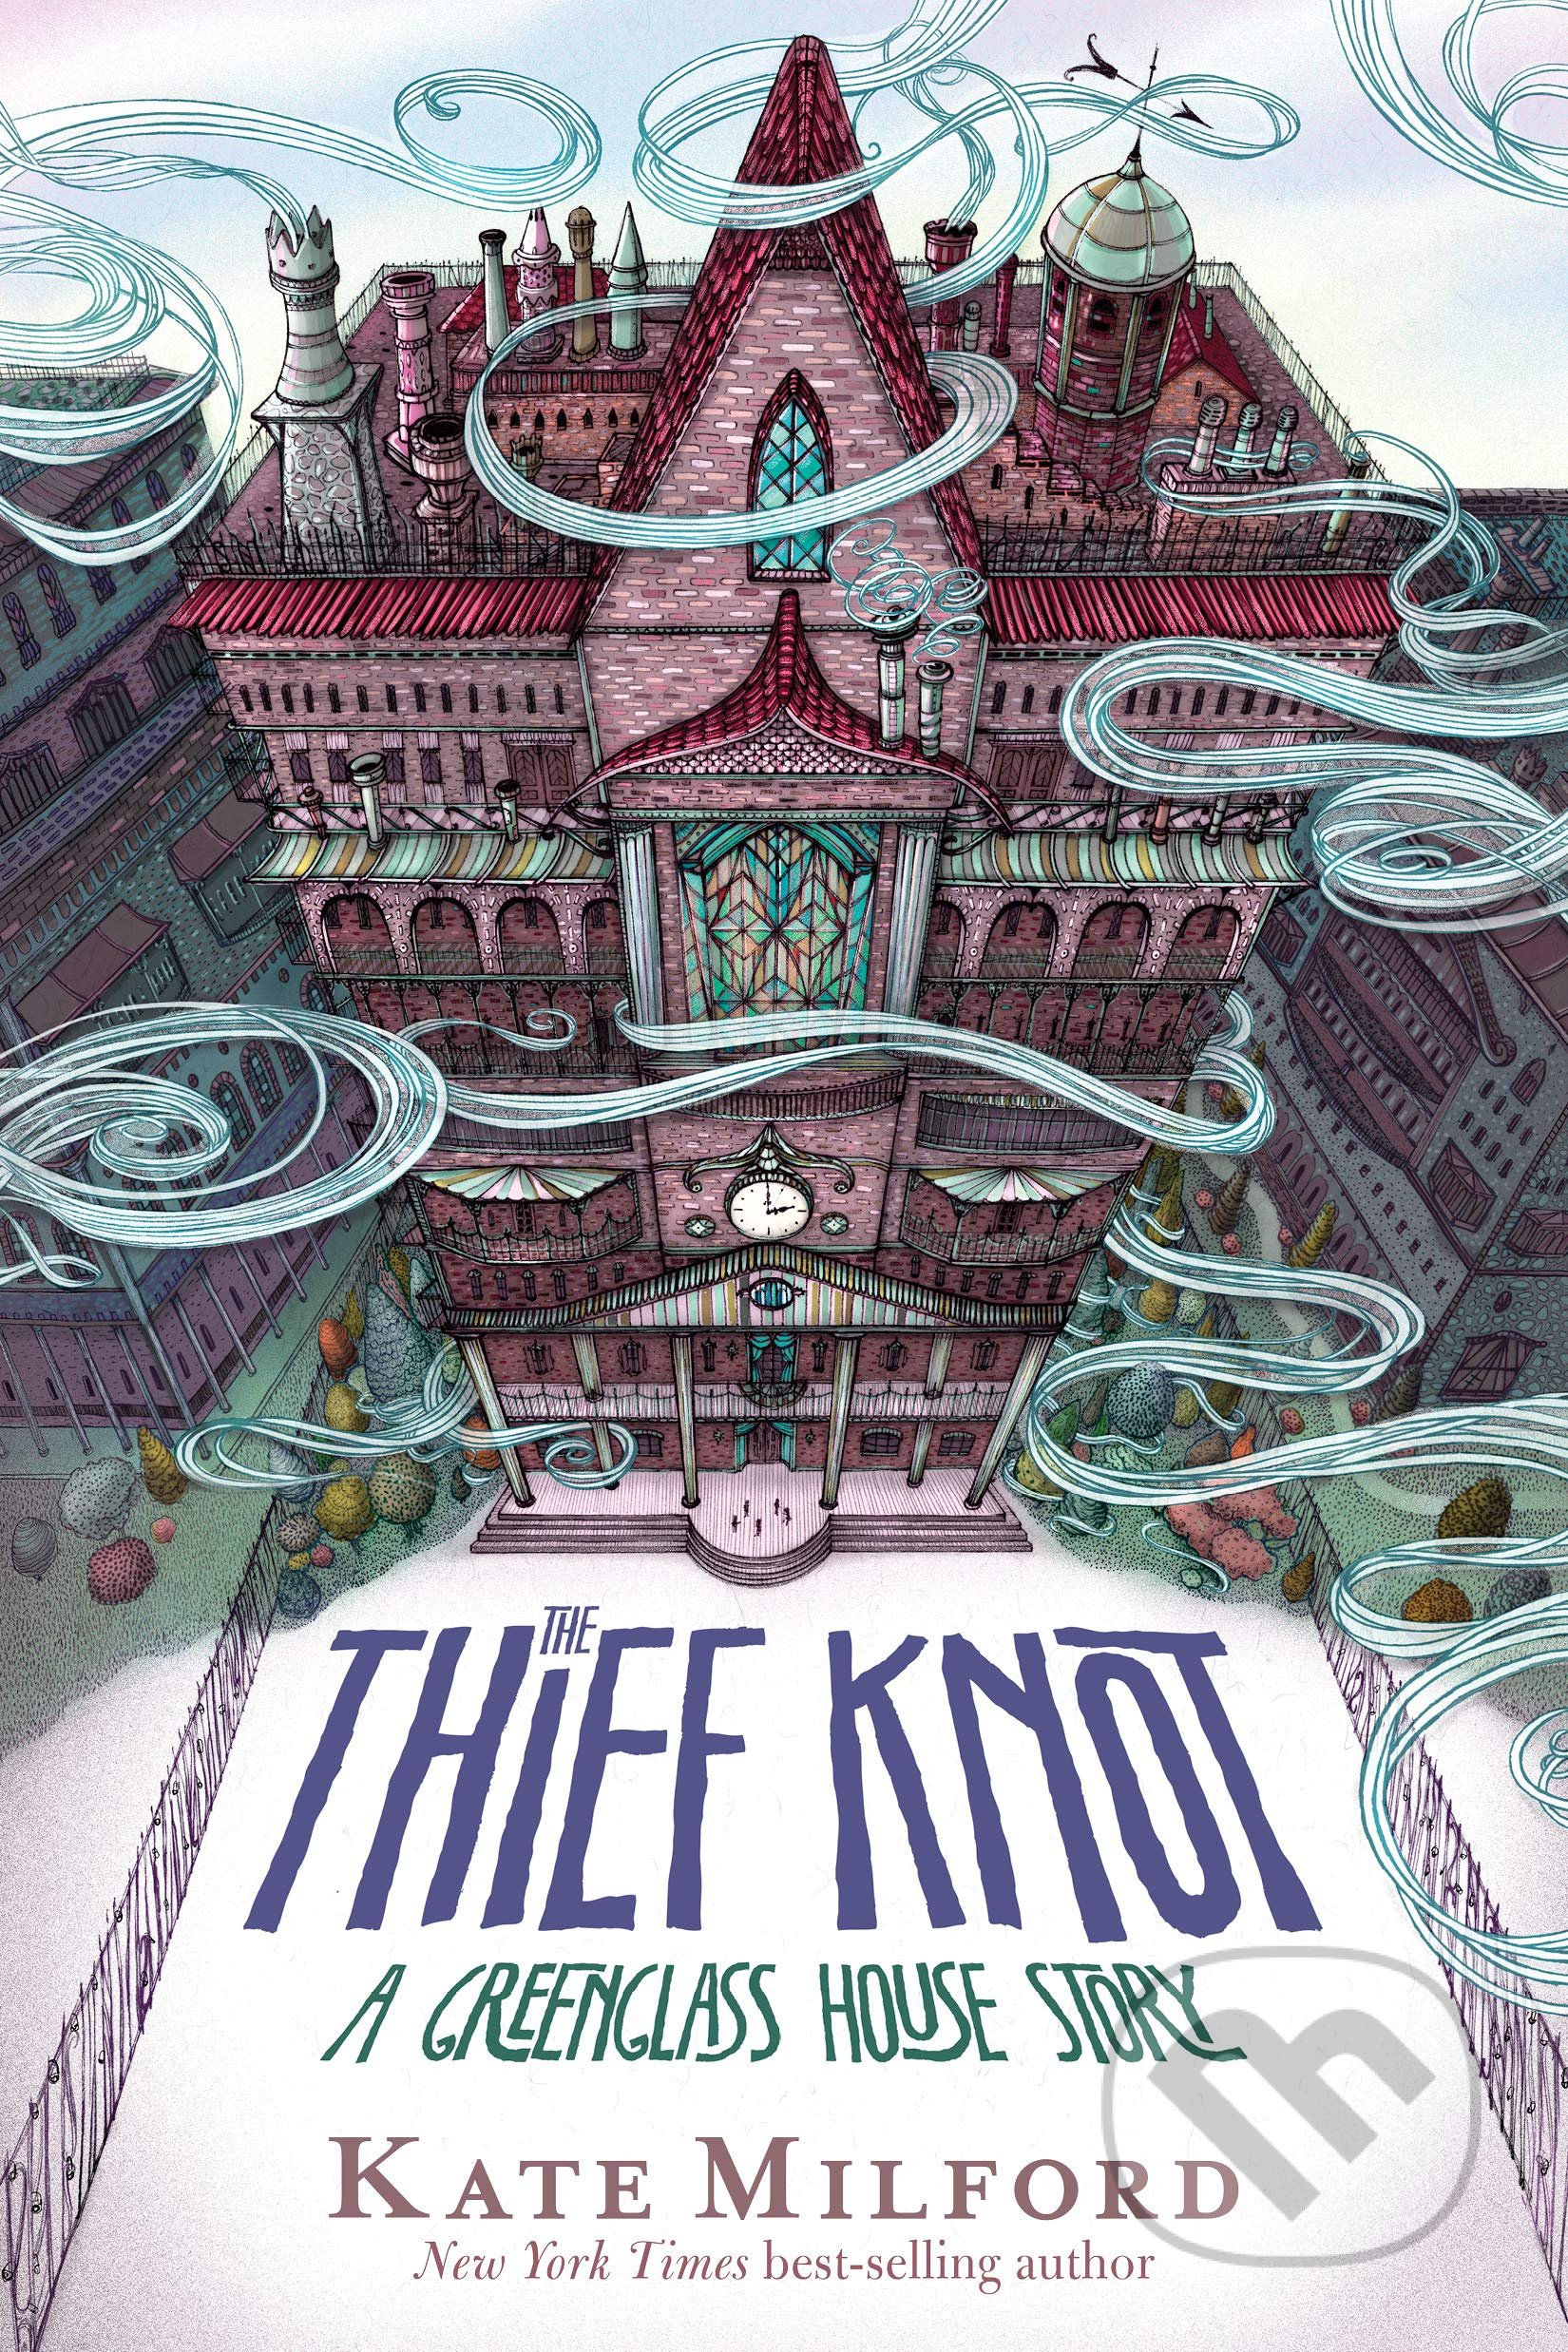 Thief Knot - Kate Milford, Clarion Books, 2020